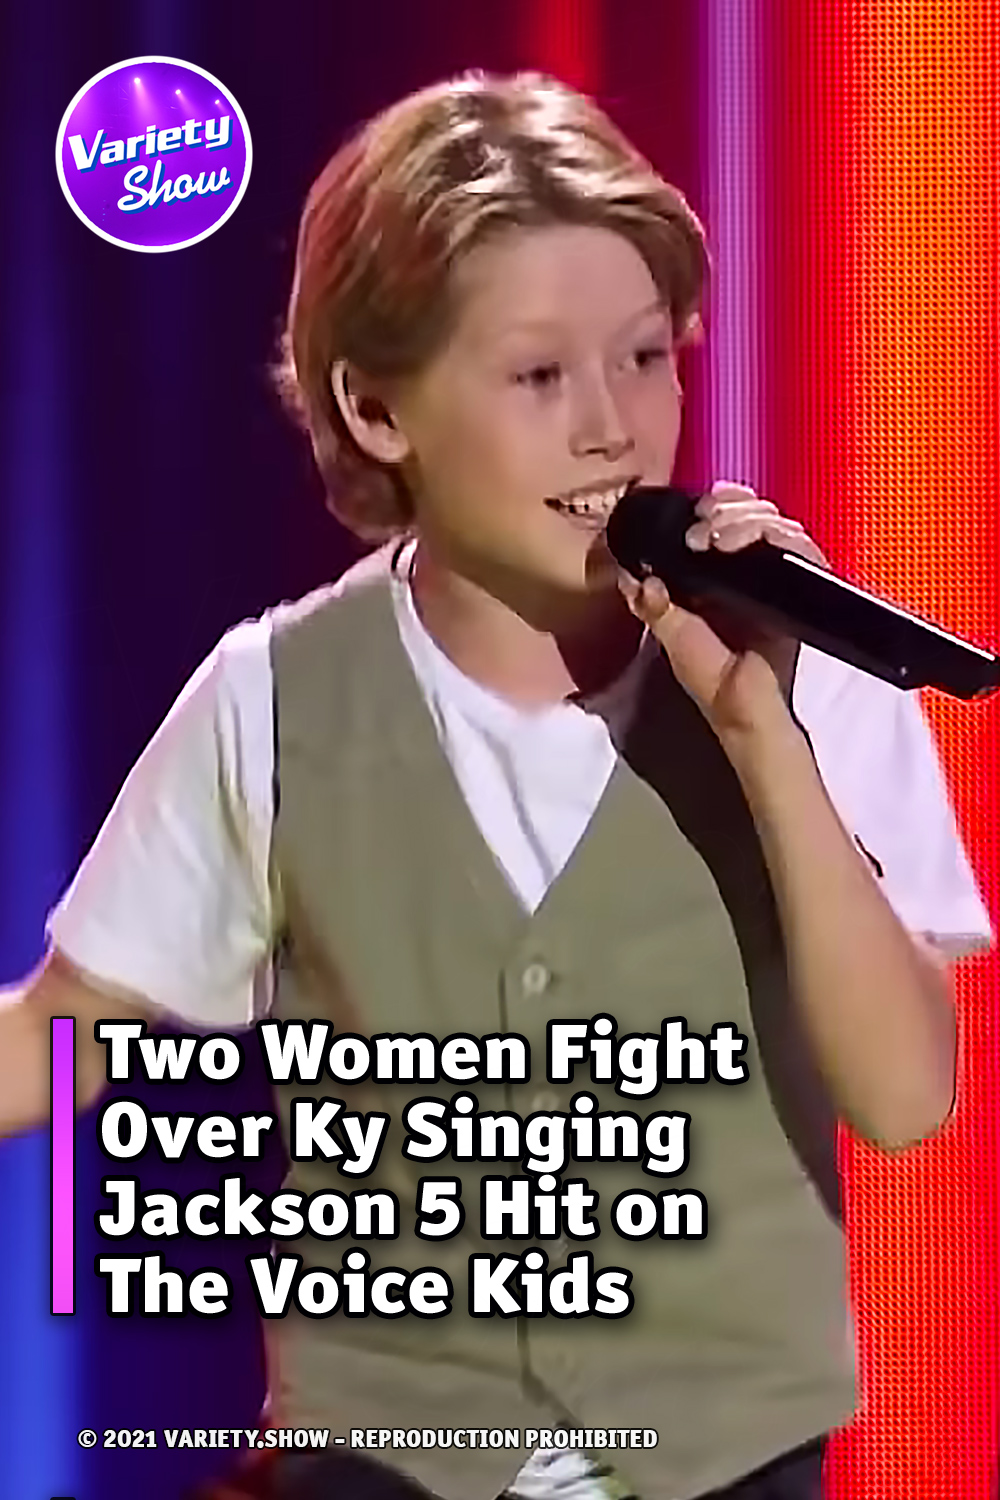 Two Women Fight Over Ky Singing Jackson 5 Hit on The Voice Kids